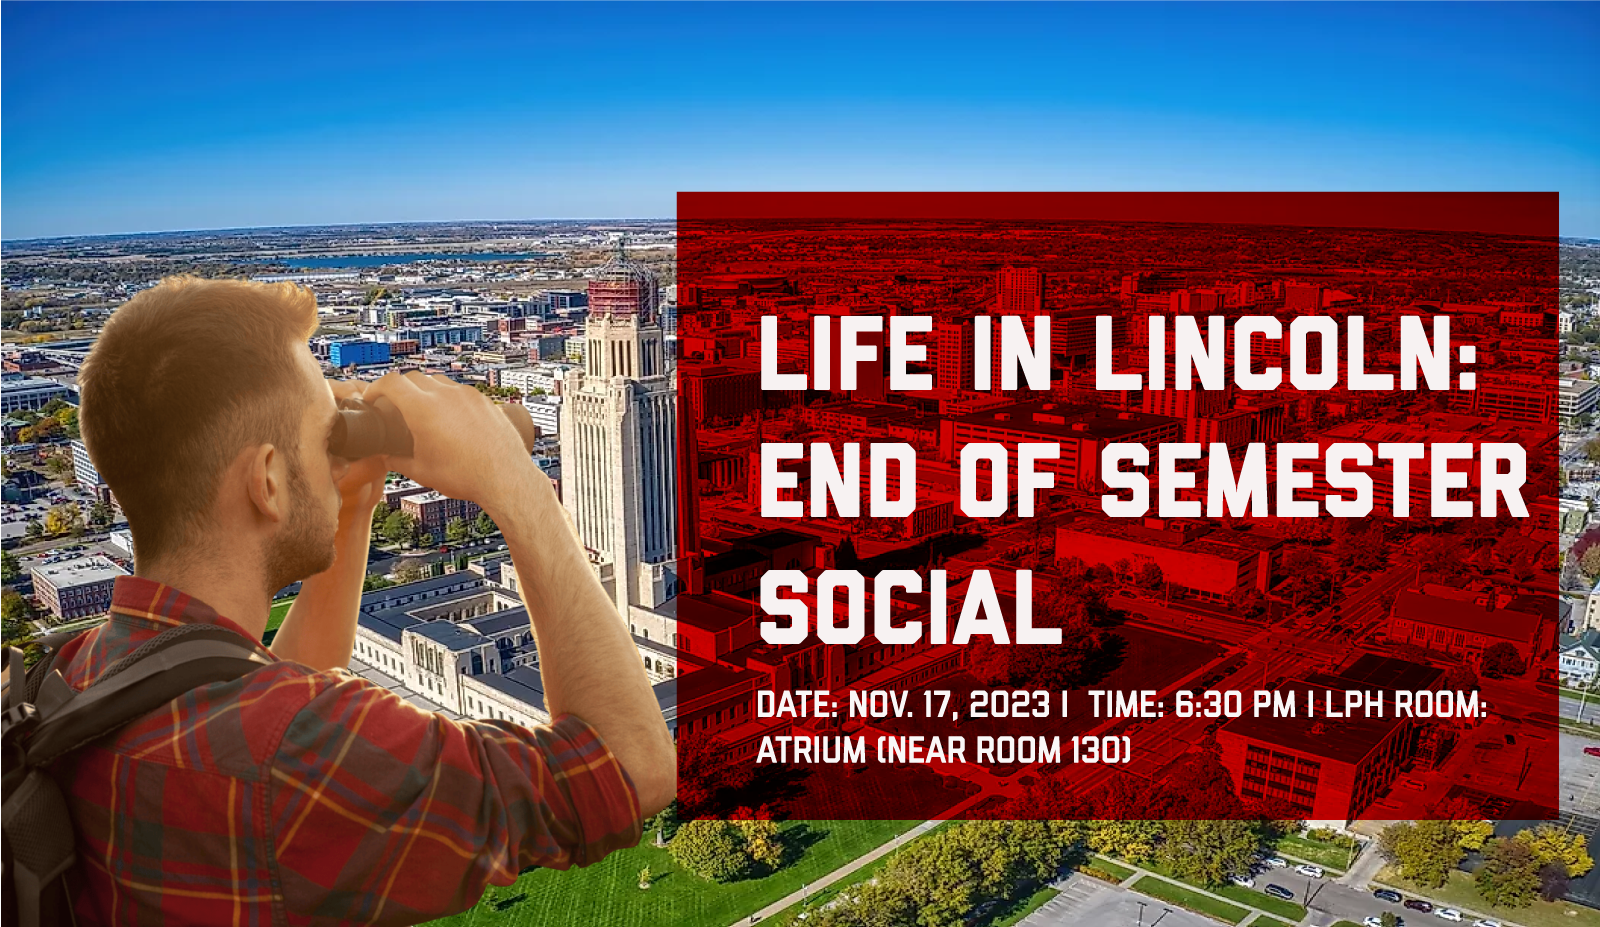 Life in Lincoln: End of Semester Social. Friday Nov. 17, 2023, by 6:30 pm at Louise Pound Hall Room: Atrium (near Room 130)